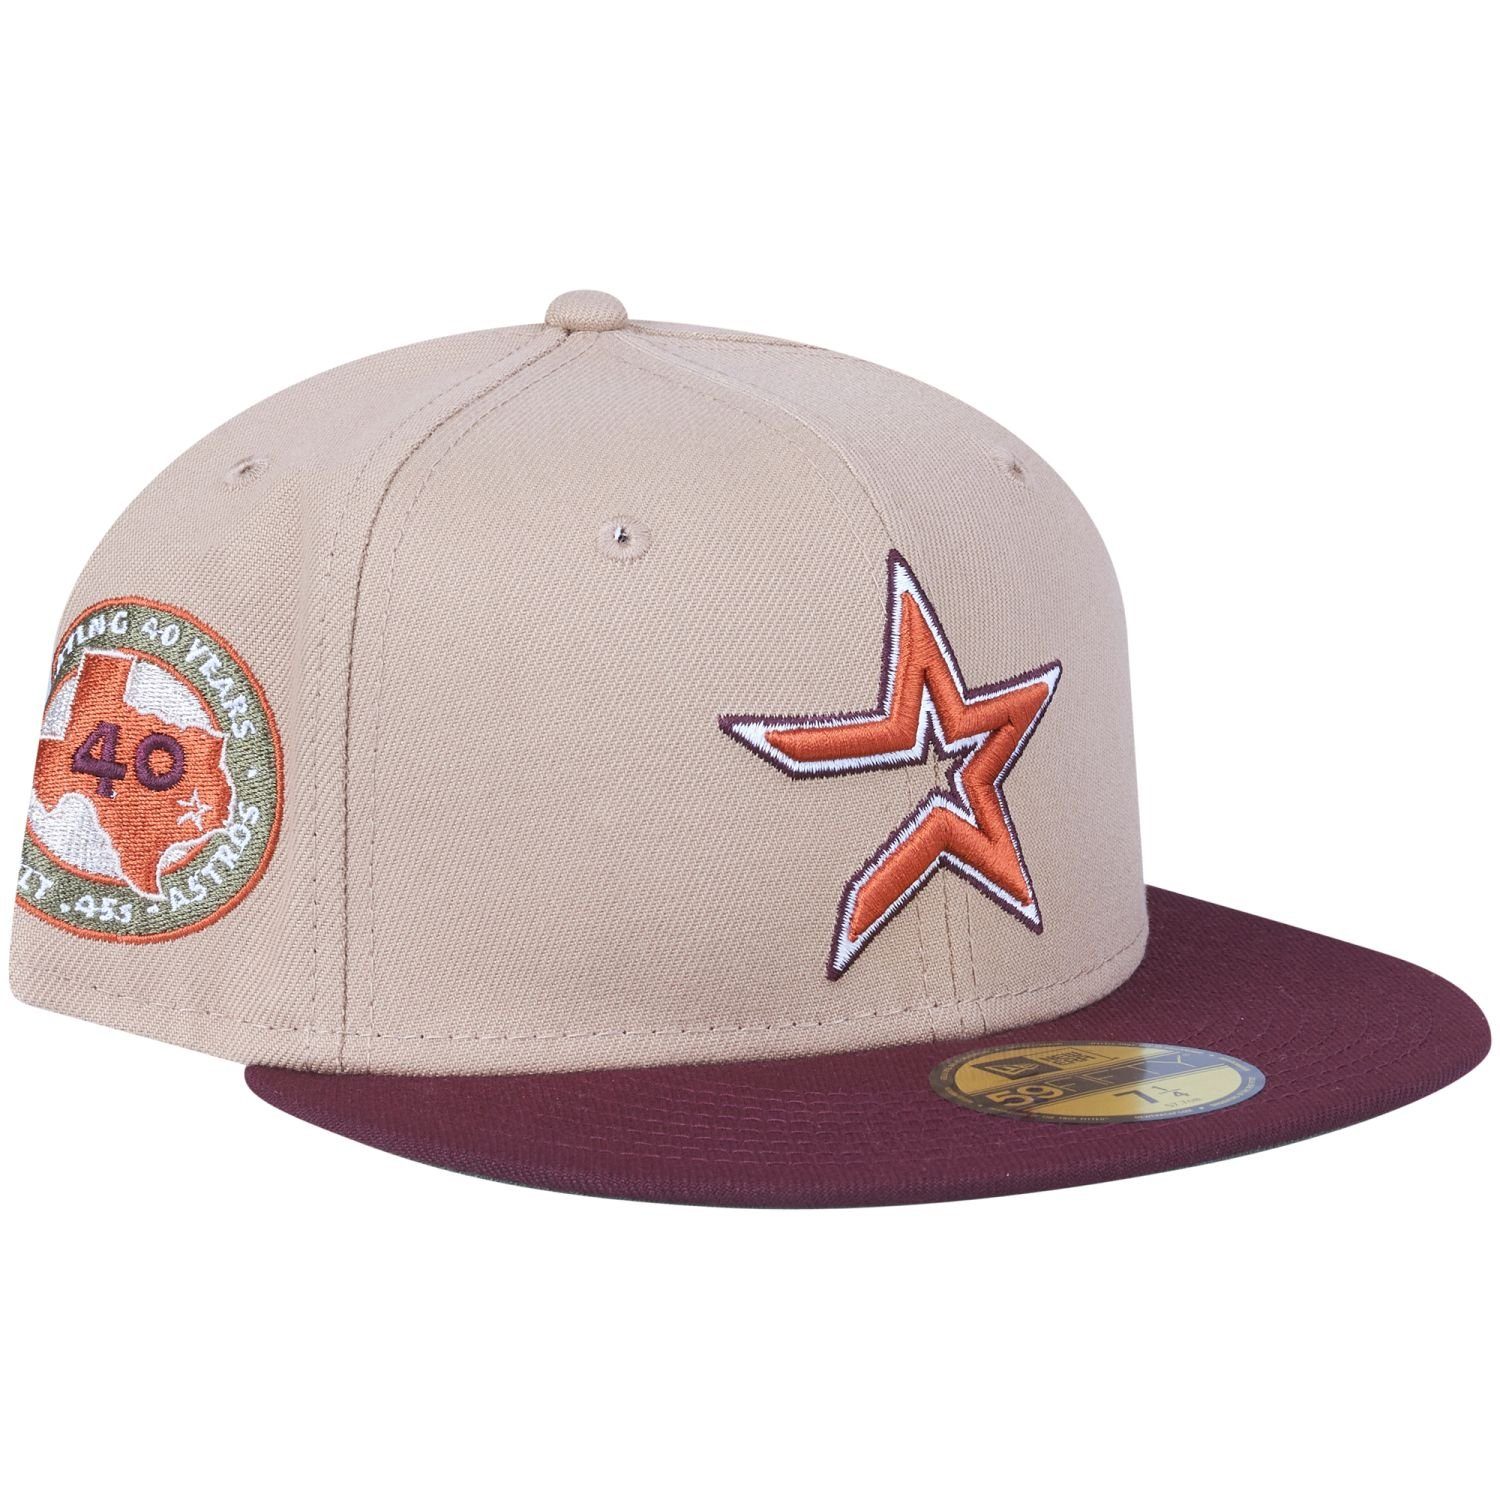 New Era Fitted Cap 59Fifty COOPERSTOWN Houston Astros